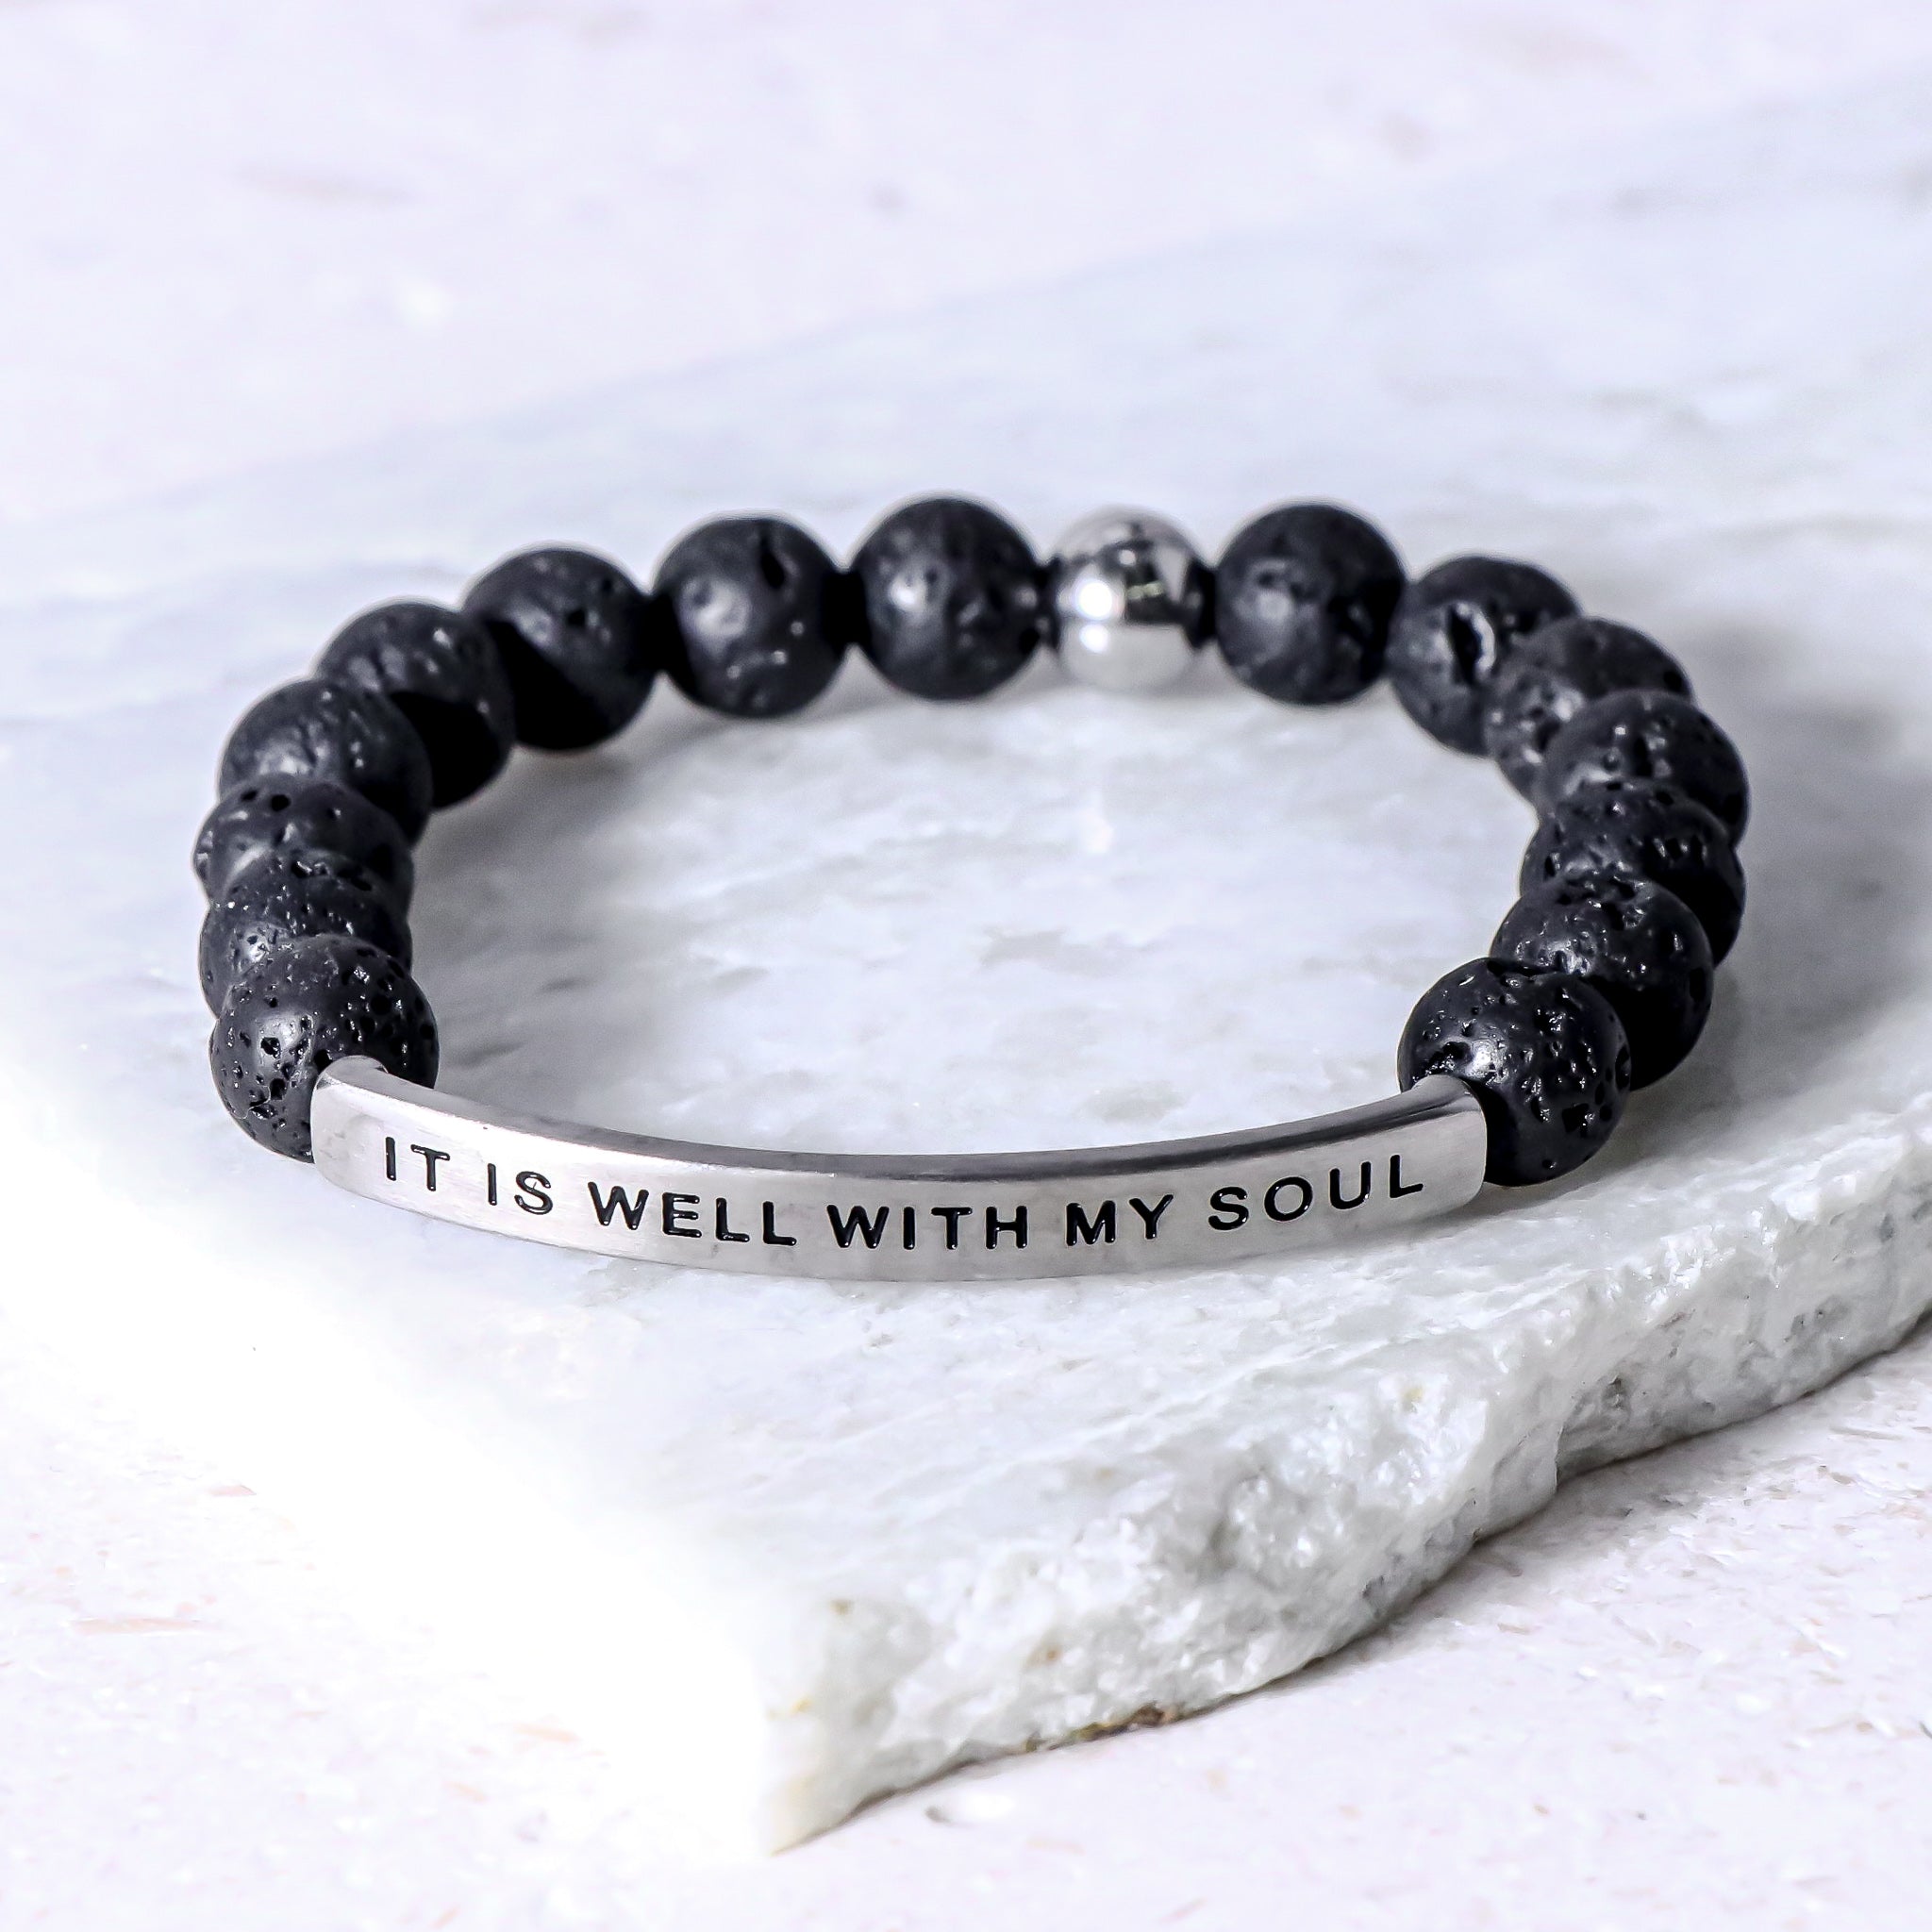 IT IS WELL WITH MY SOUL - Inspiration Co.